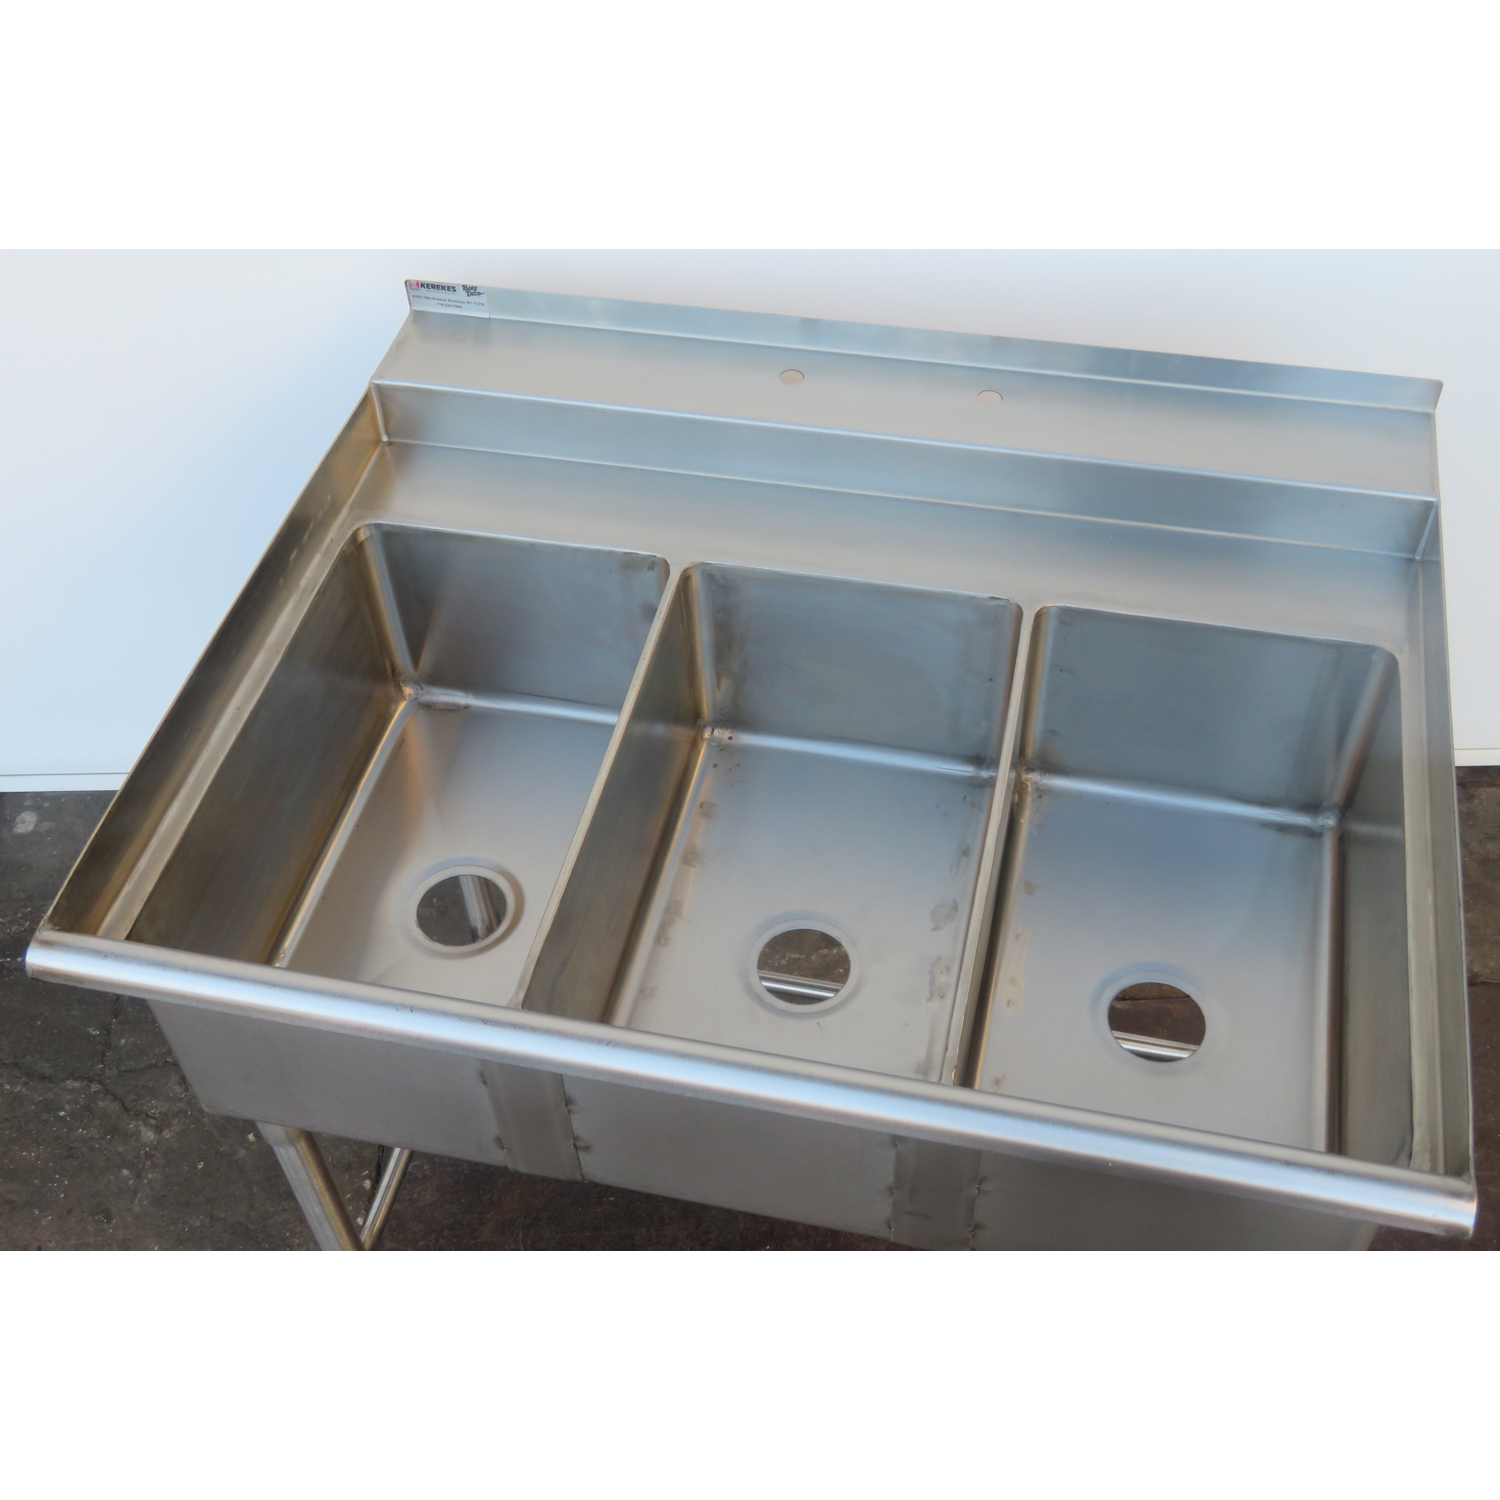 3 Compartment Sink  41.5" X 29.5" image 4